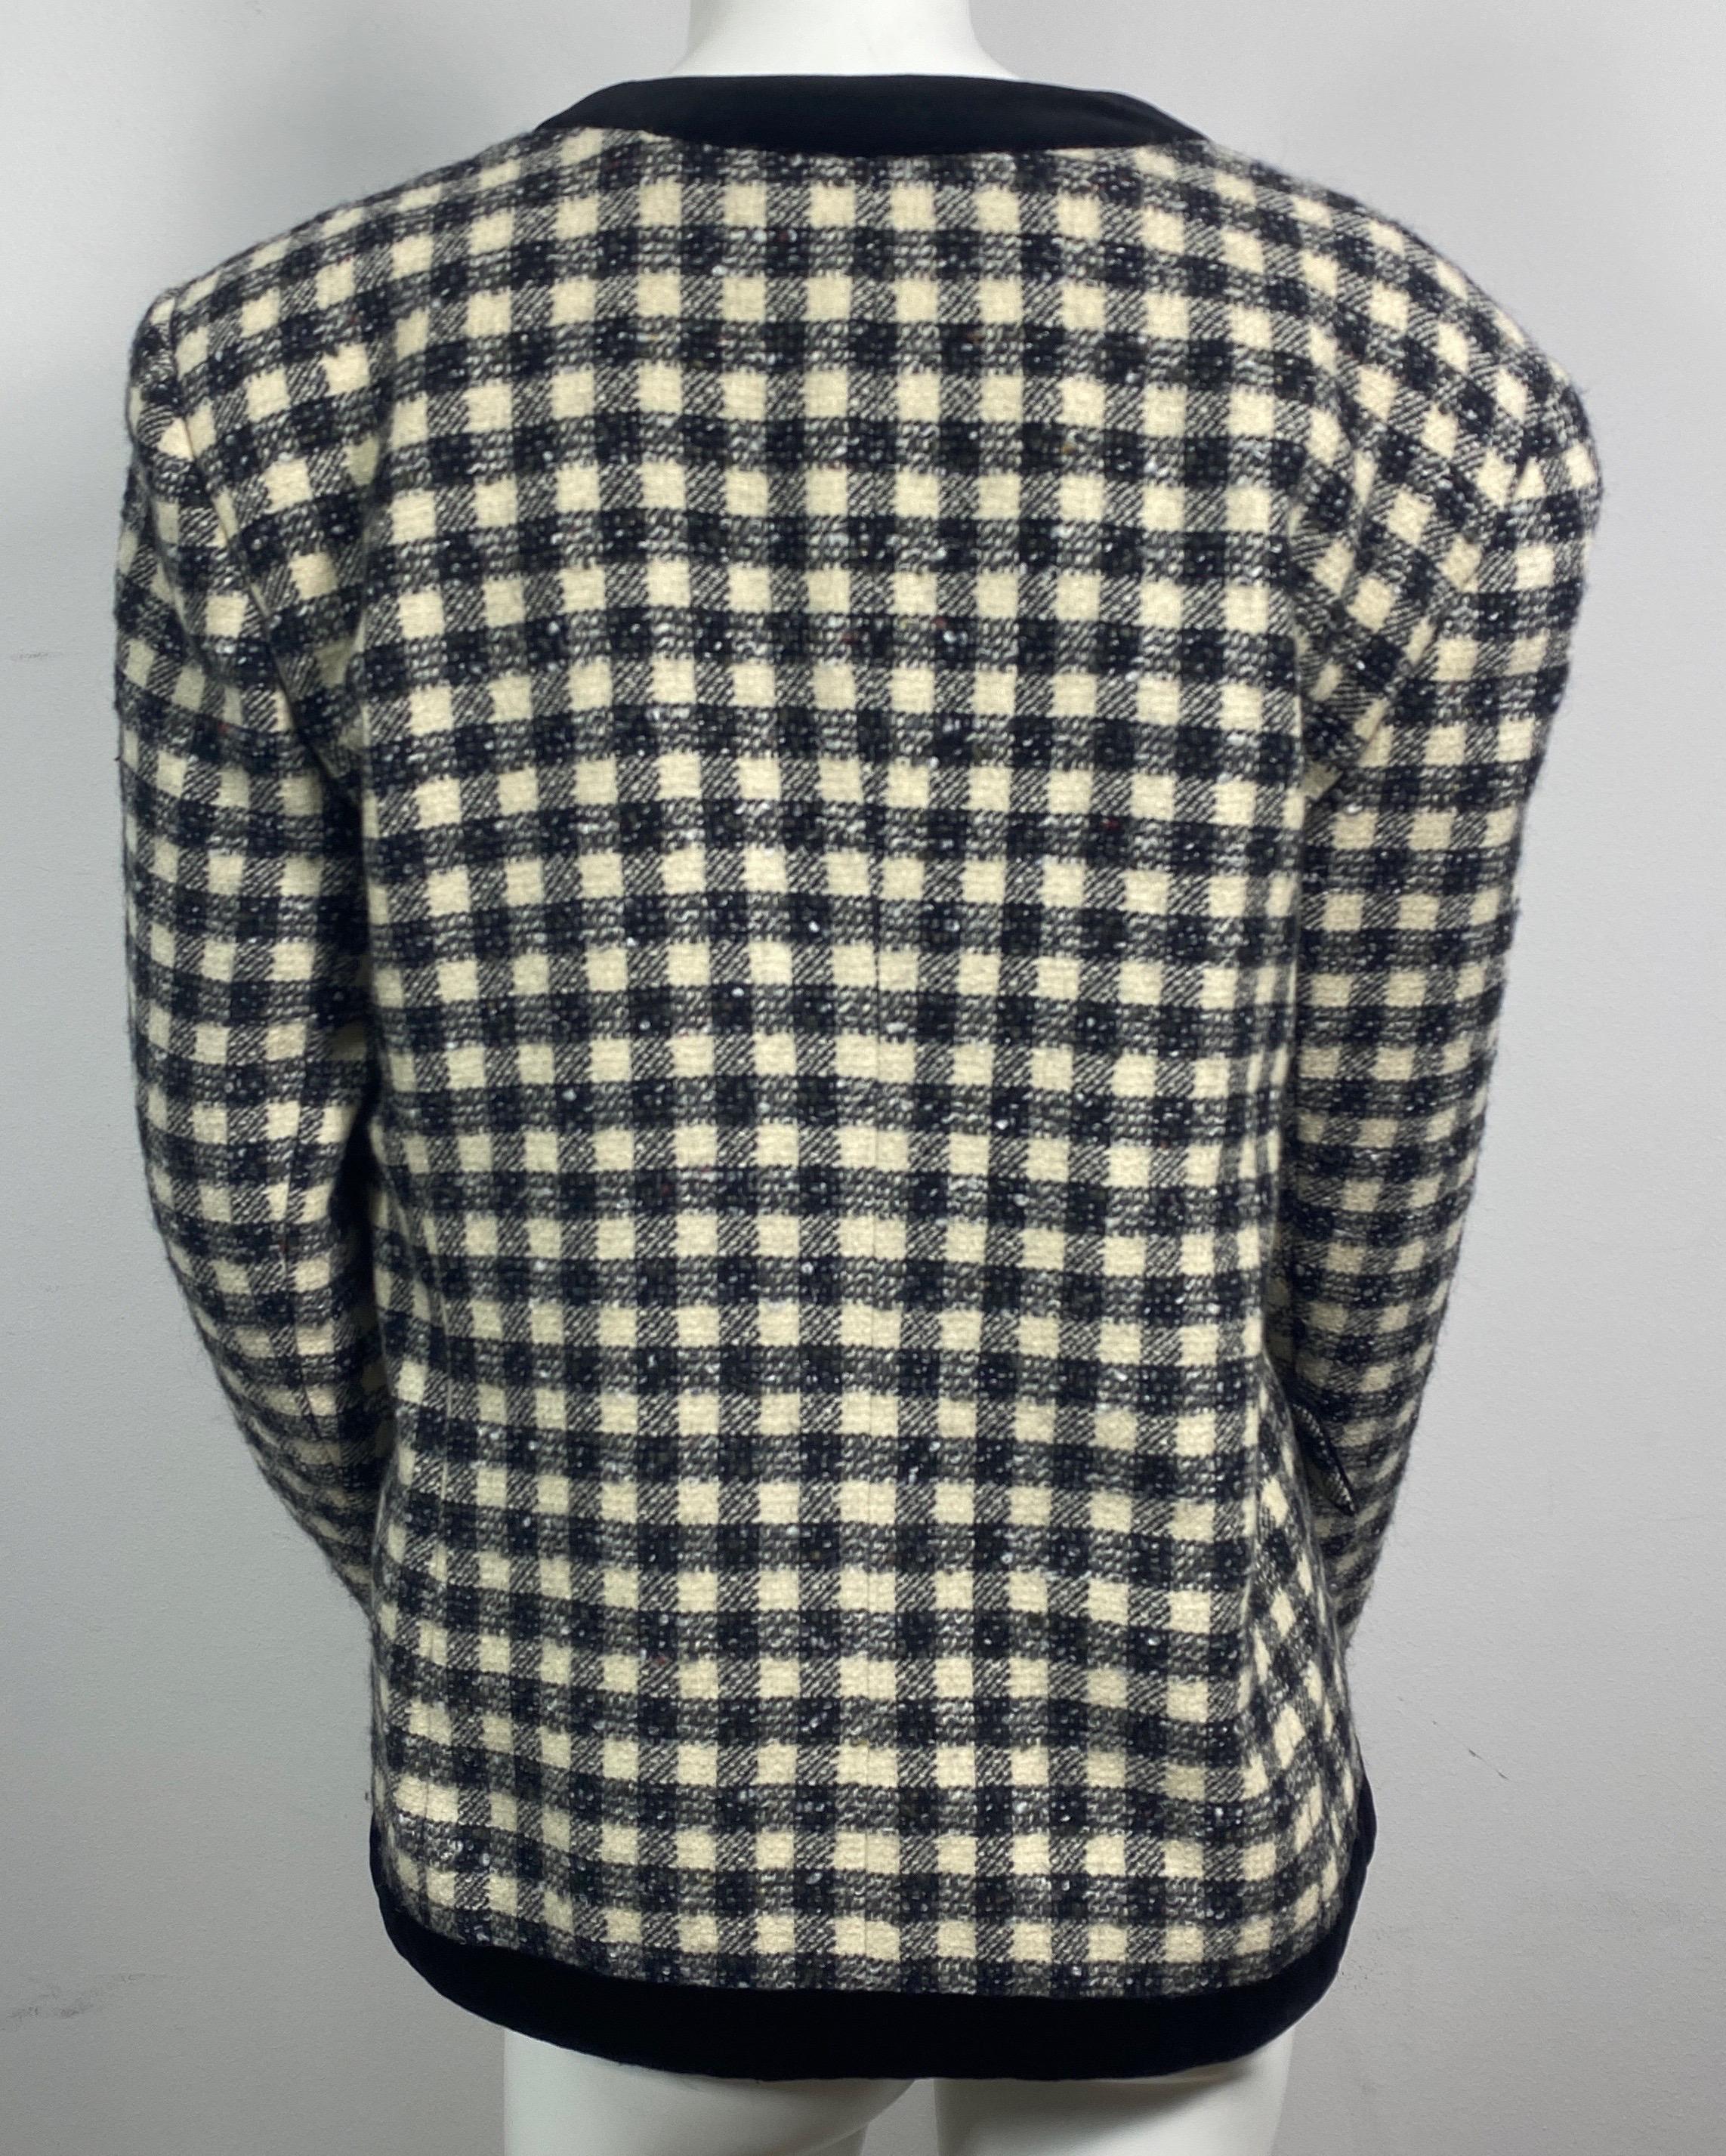 Giorgio Armani 1990’s Black and Ivory Tweed and Velvet Checkered Jacket -Size 46 For Sale 3